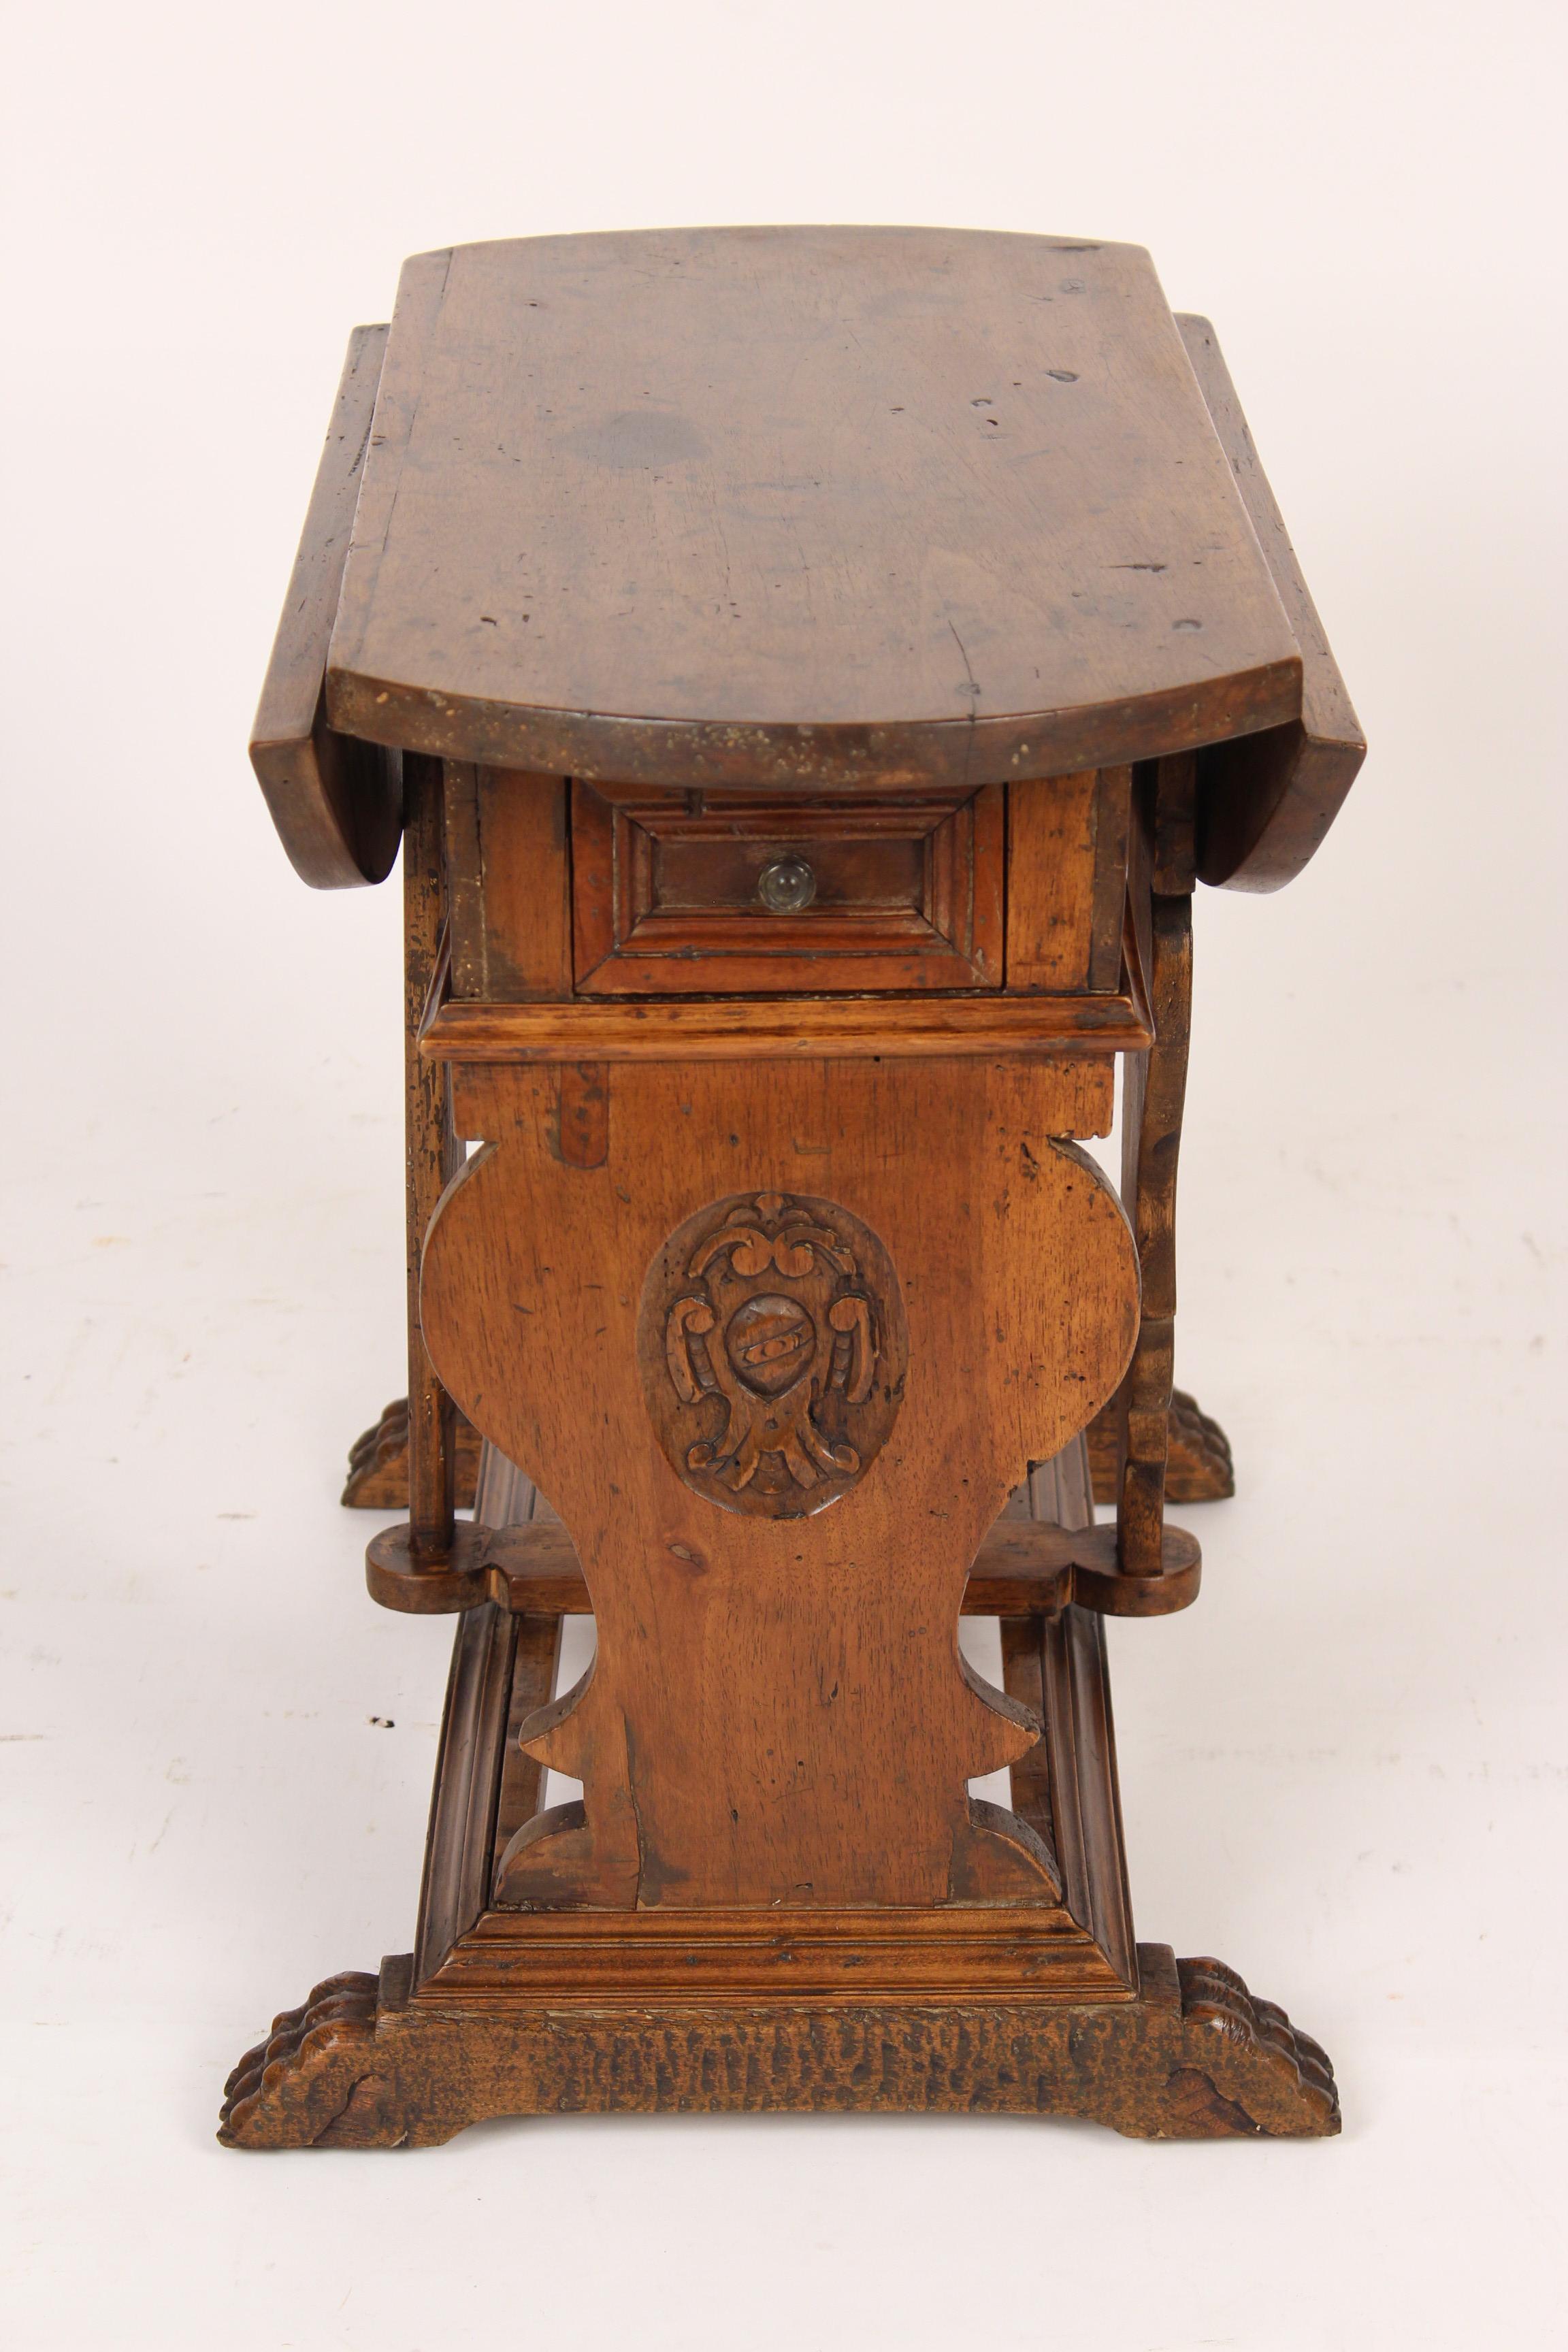 Baroque style walnut drop-leaf occasional table, made from 18th century and later elements, assembled, circa 1930s. Dimensions as photographed, height 20